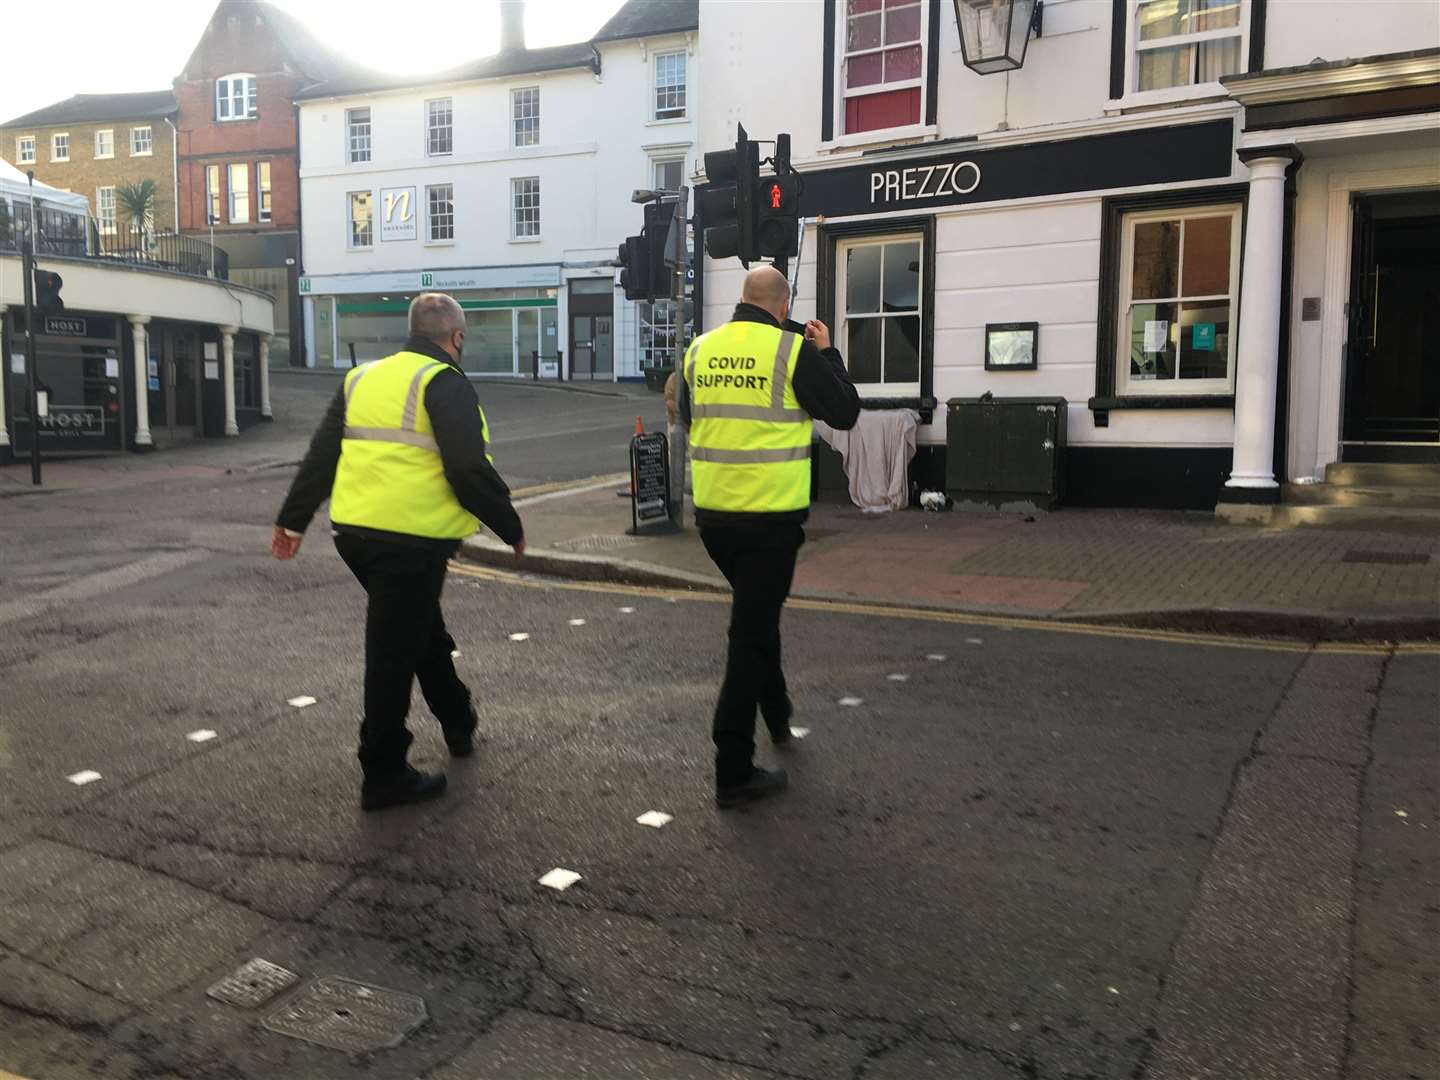 Covid marshals have begun patrolling towns across Kent